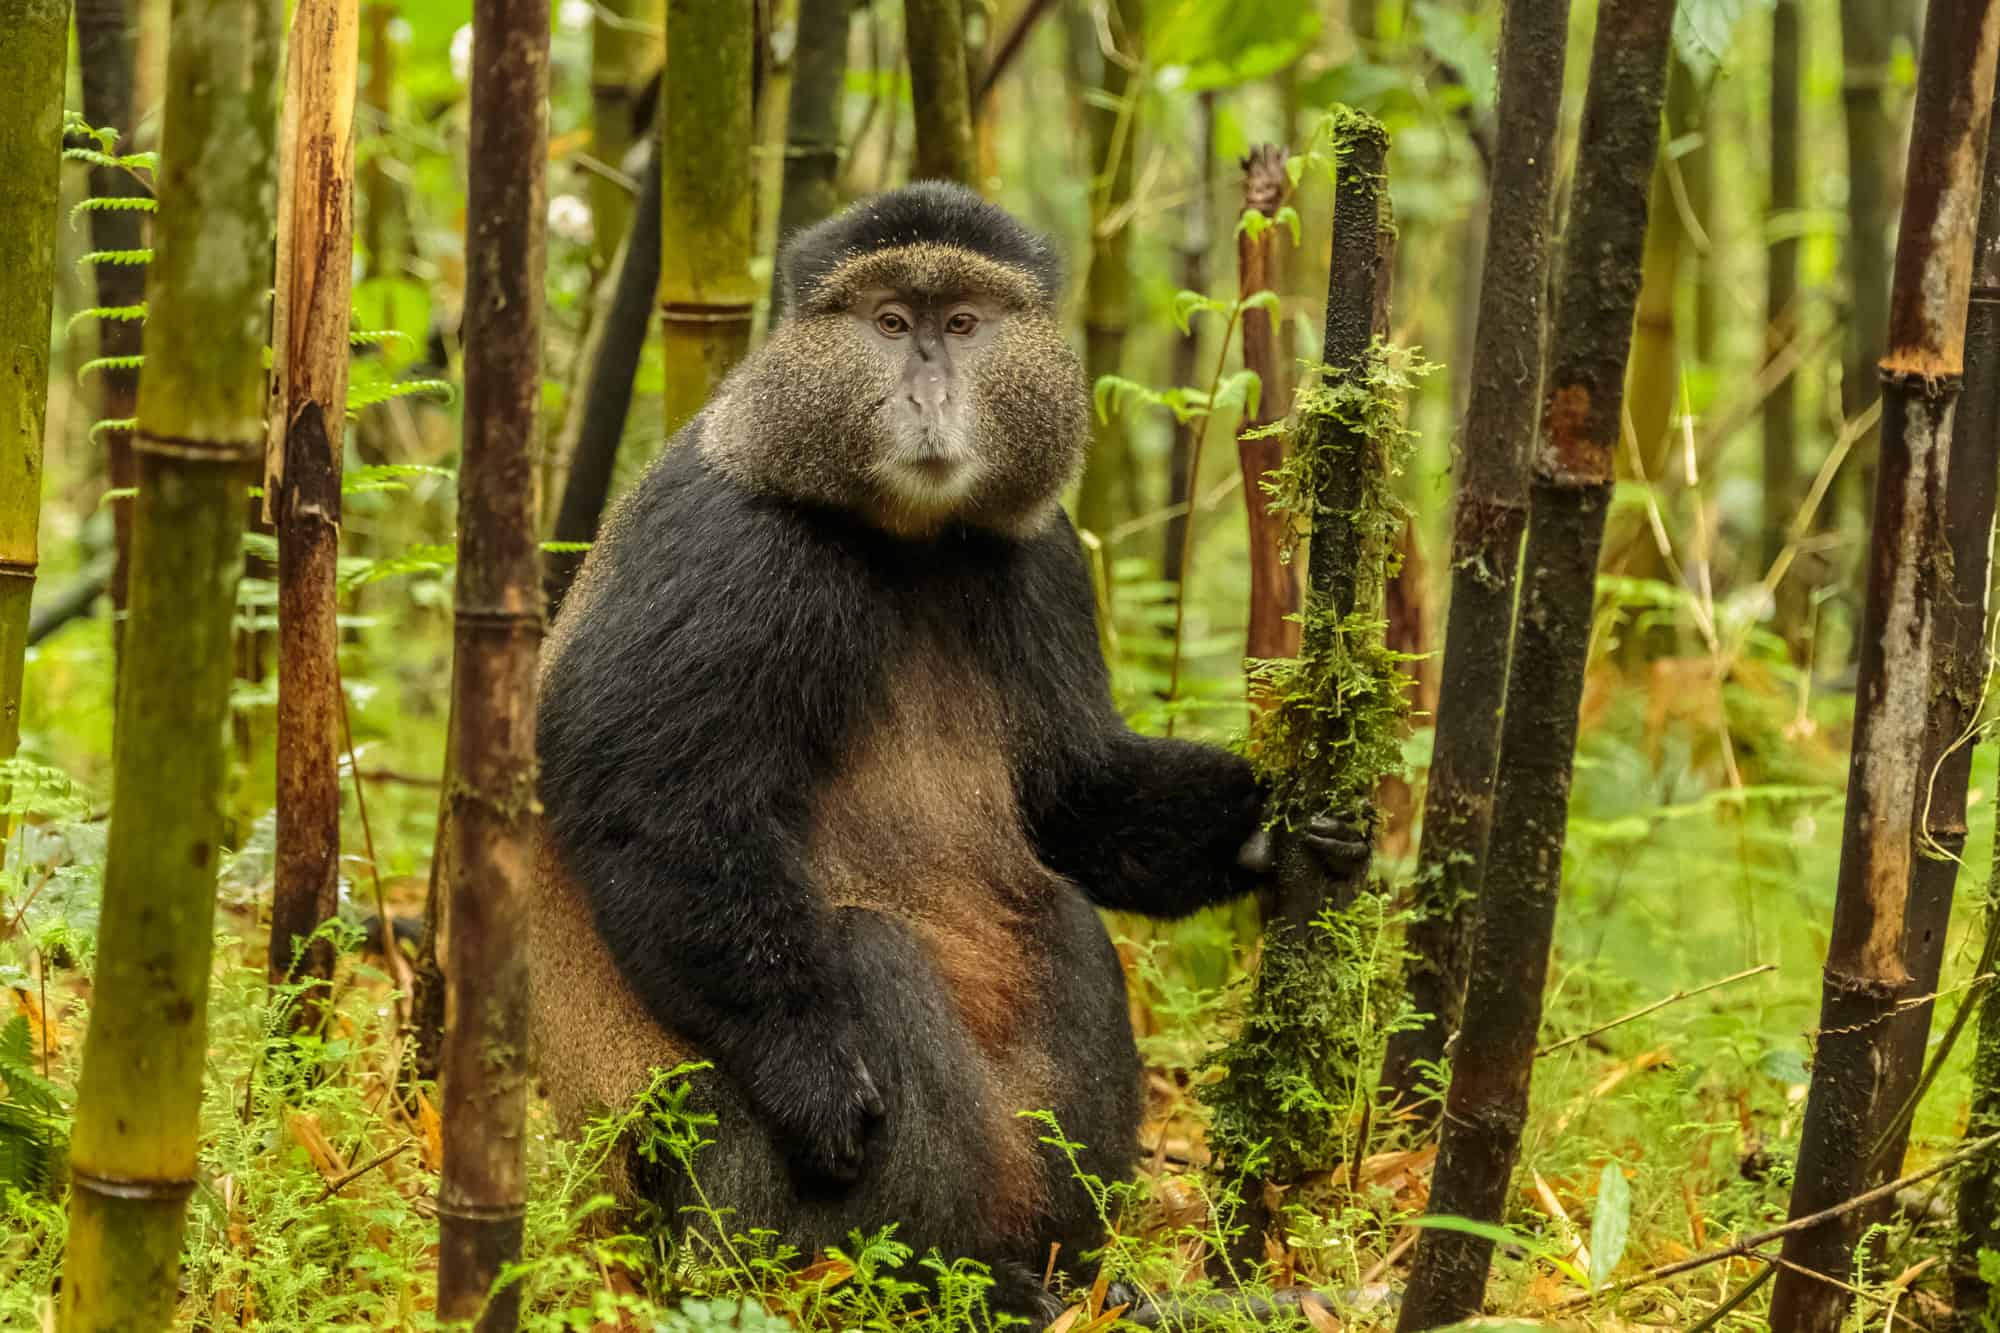 <p>Though this small Central African country still conjures memories of its troubled past, it has emerged as a beacon of hope, resilience, and natural beauty. Trekking through a dense jungle and coming face-to-face with a mountain gorilla family was incredibly humbling. Their human-like expressions and familial interactions left a profound impact.</p>